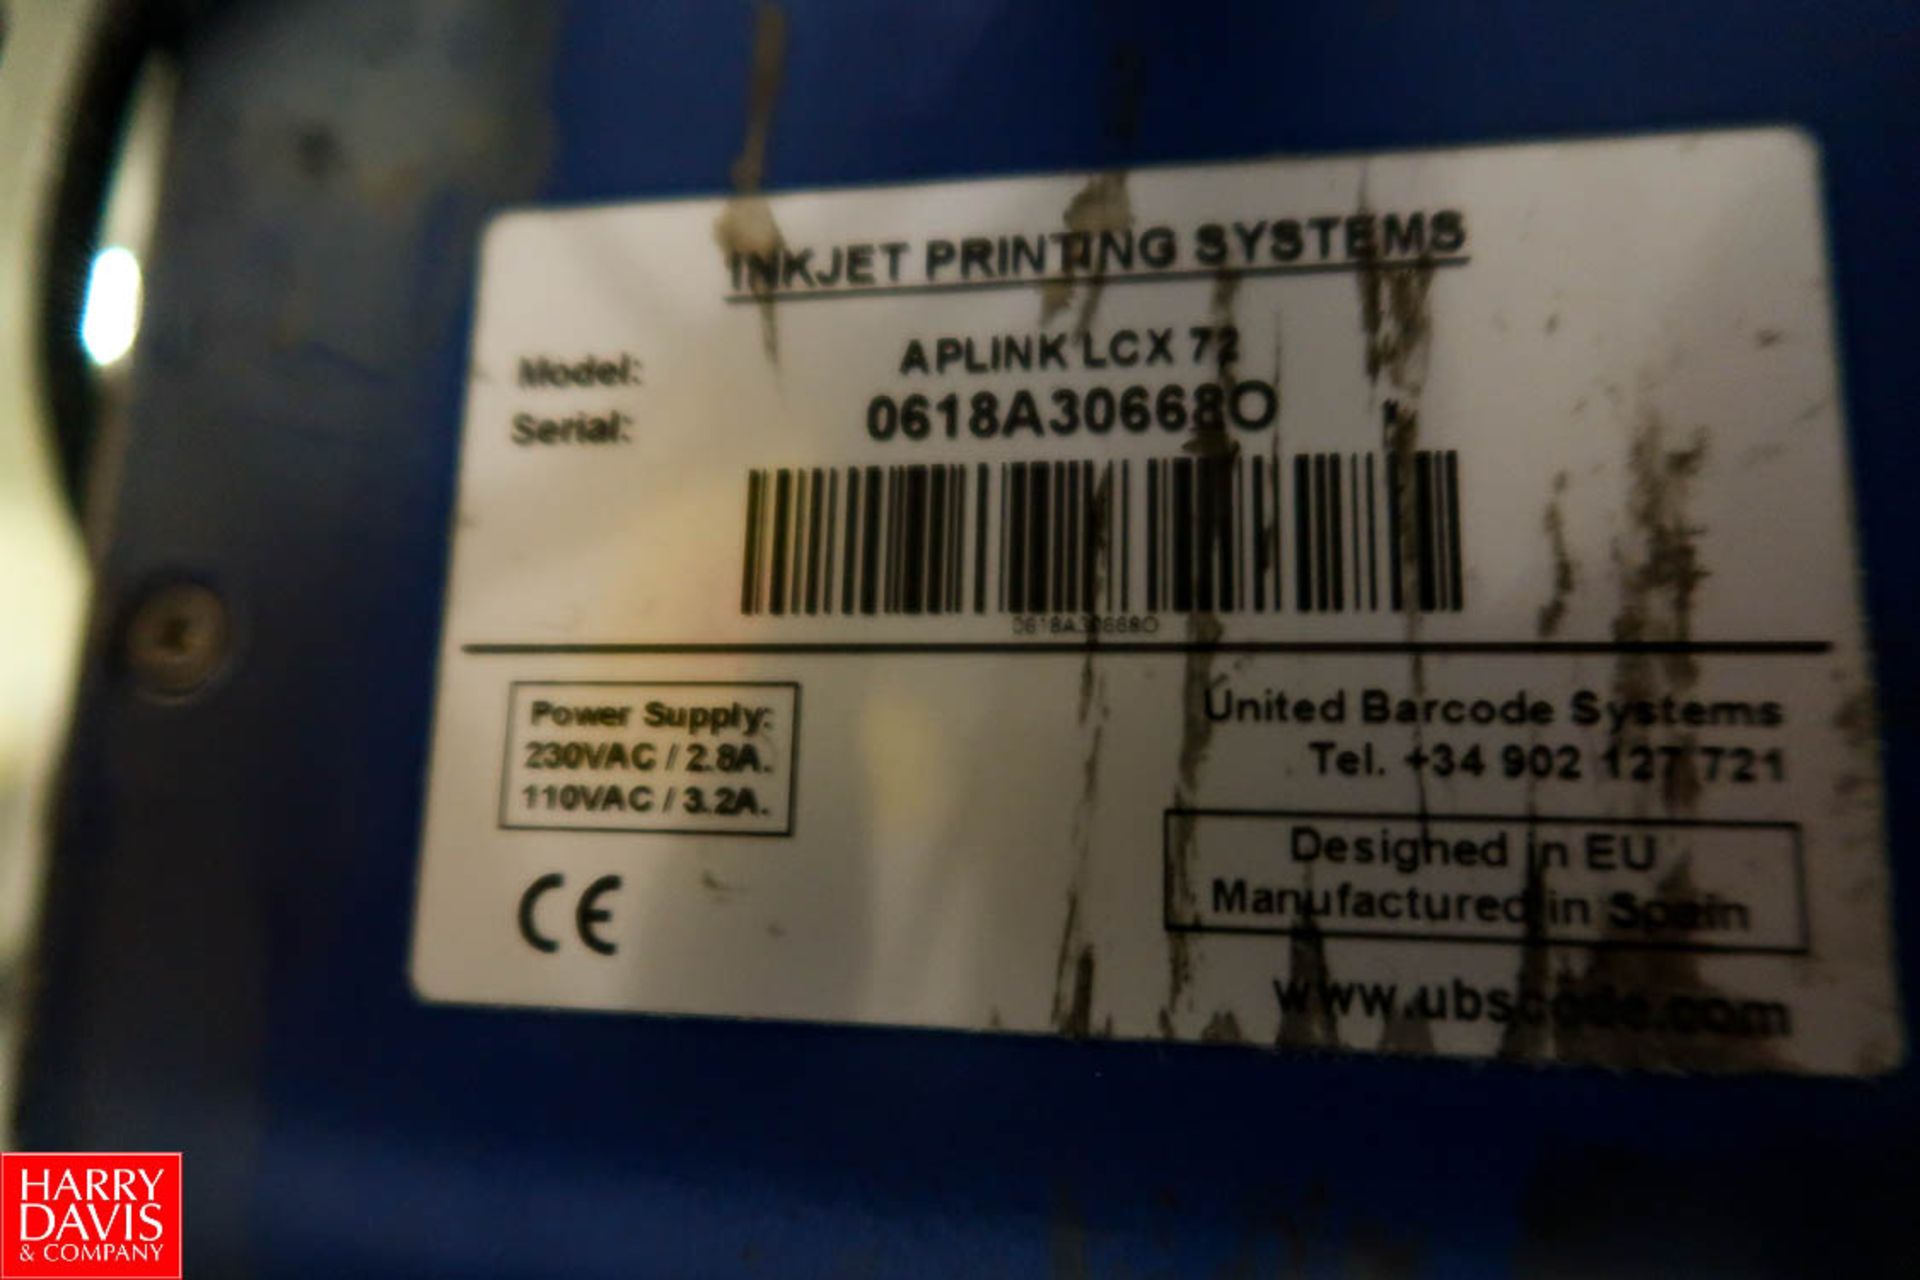 United Barcode Systems Barcode Inkjet Printer Model: APLINK LCX72 S/N: 0618A30668O. Rigging Fee: $ - Image 4 of 4